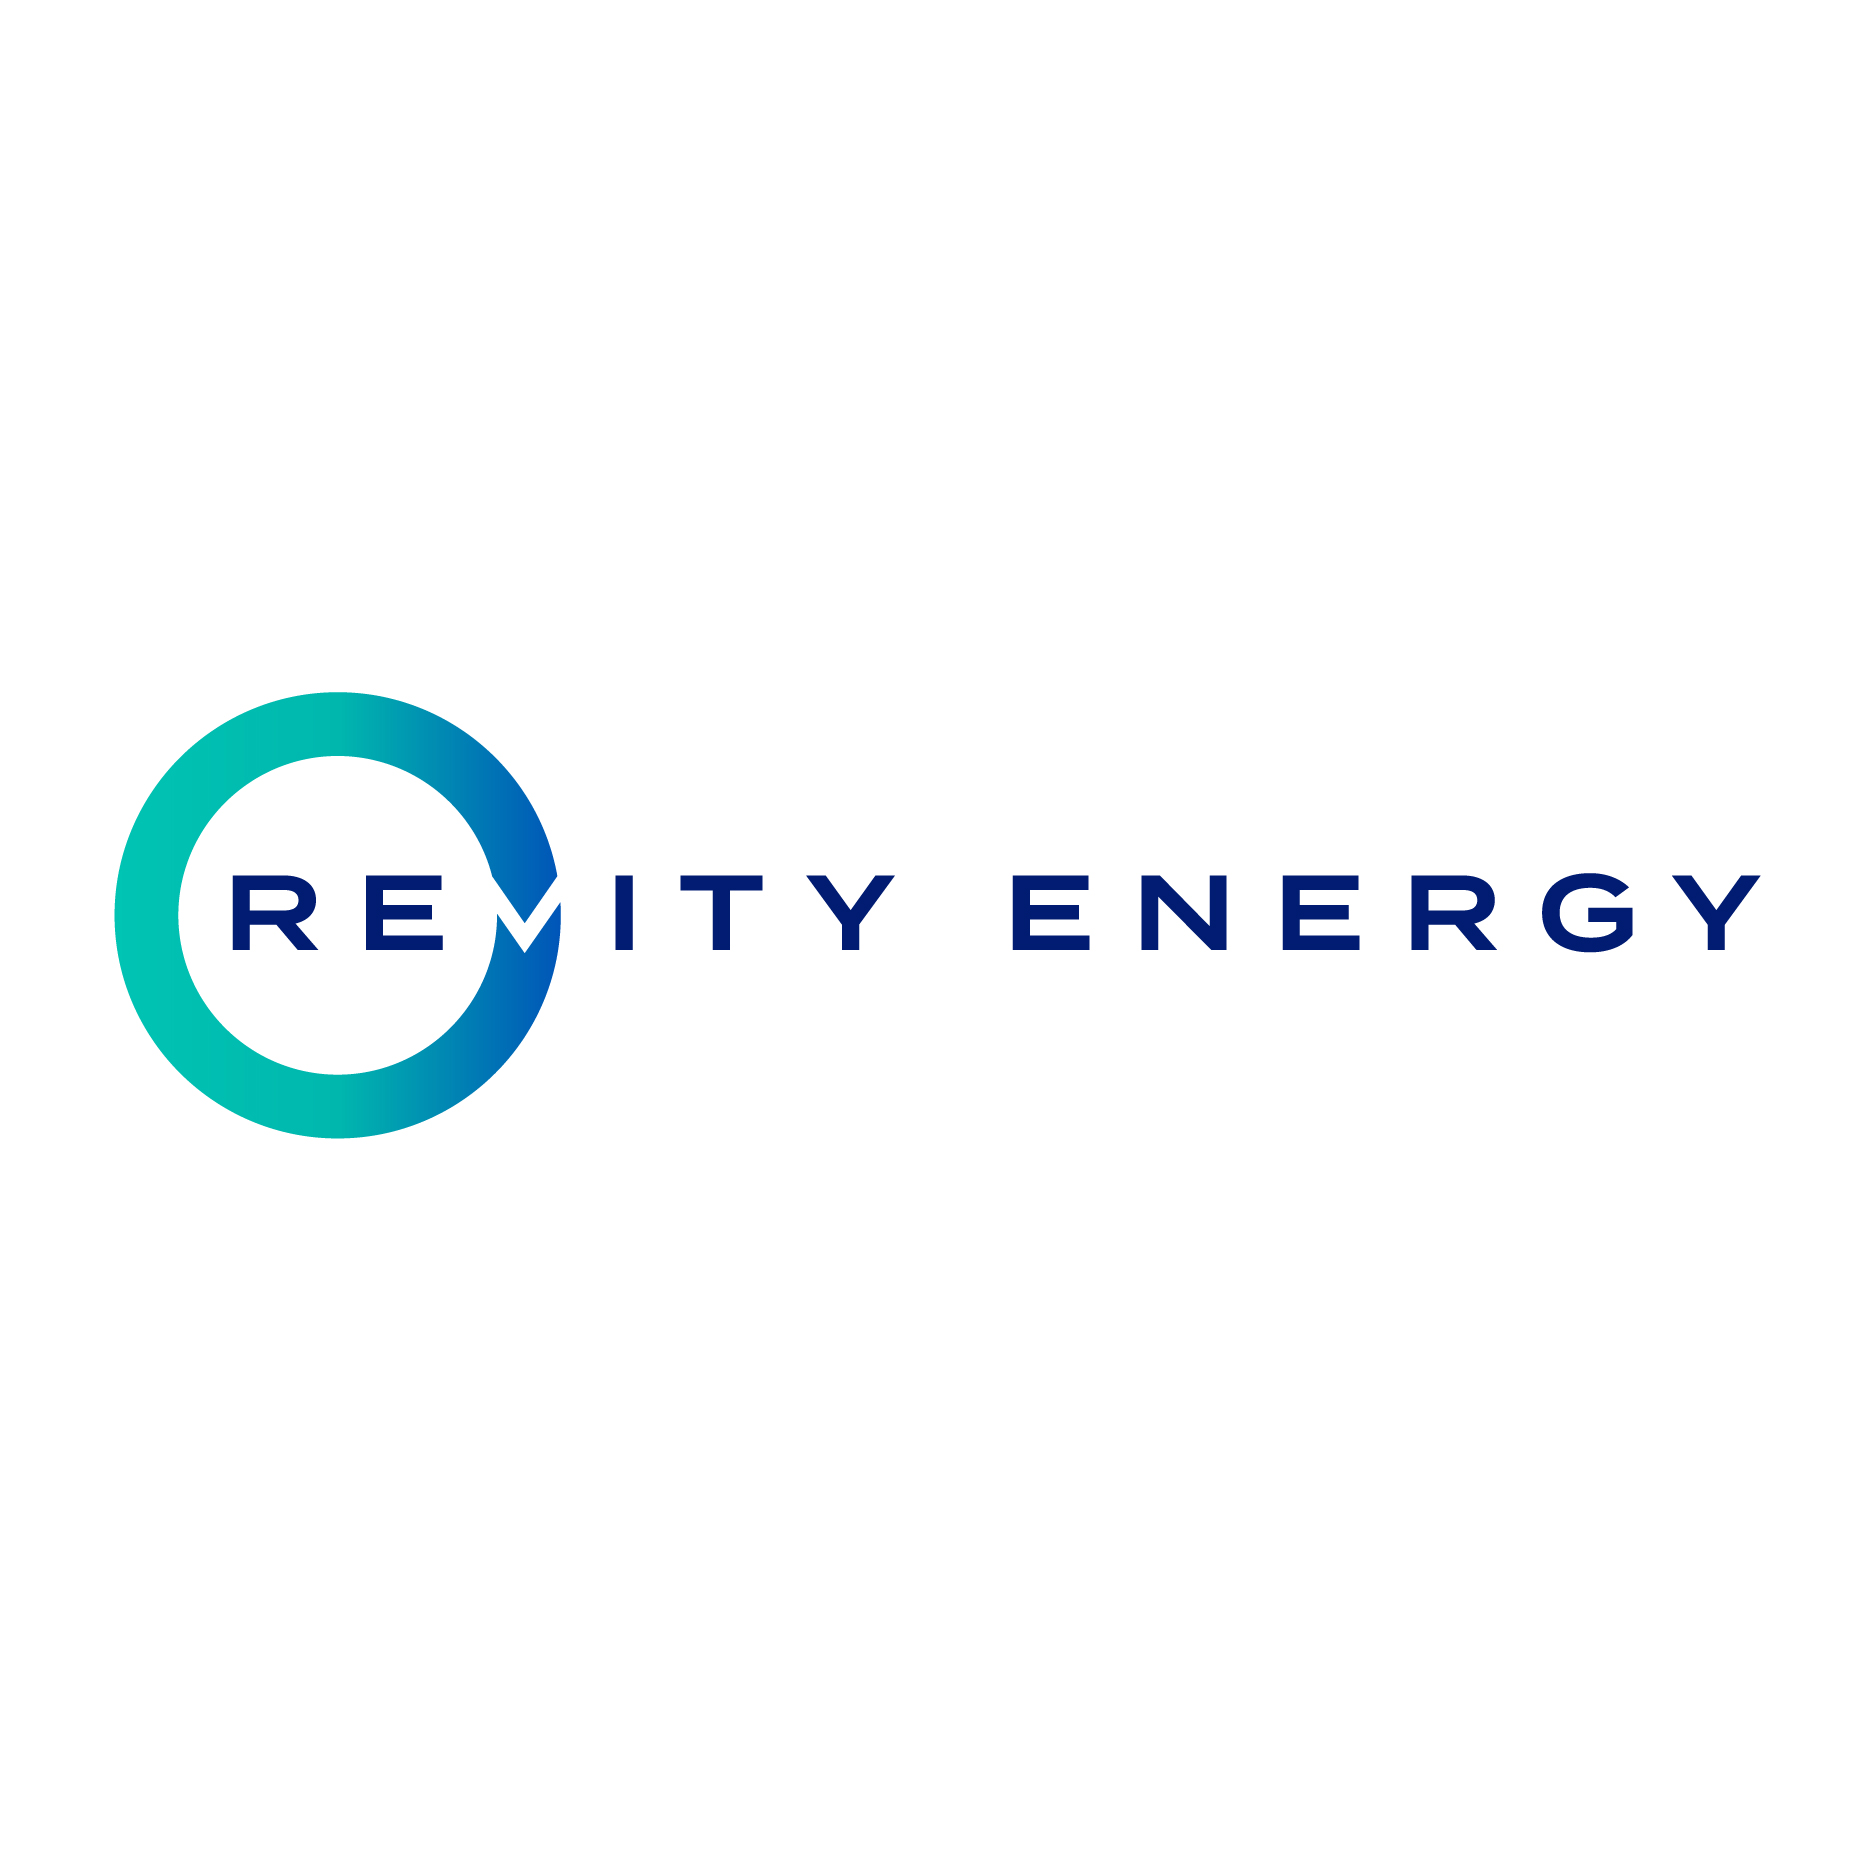 Revity (Horizontal - full name) logo design by logo designer Figmints Delicious Design for your inspiration and for the worlds largest logo competition